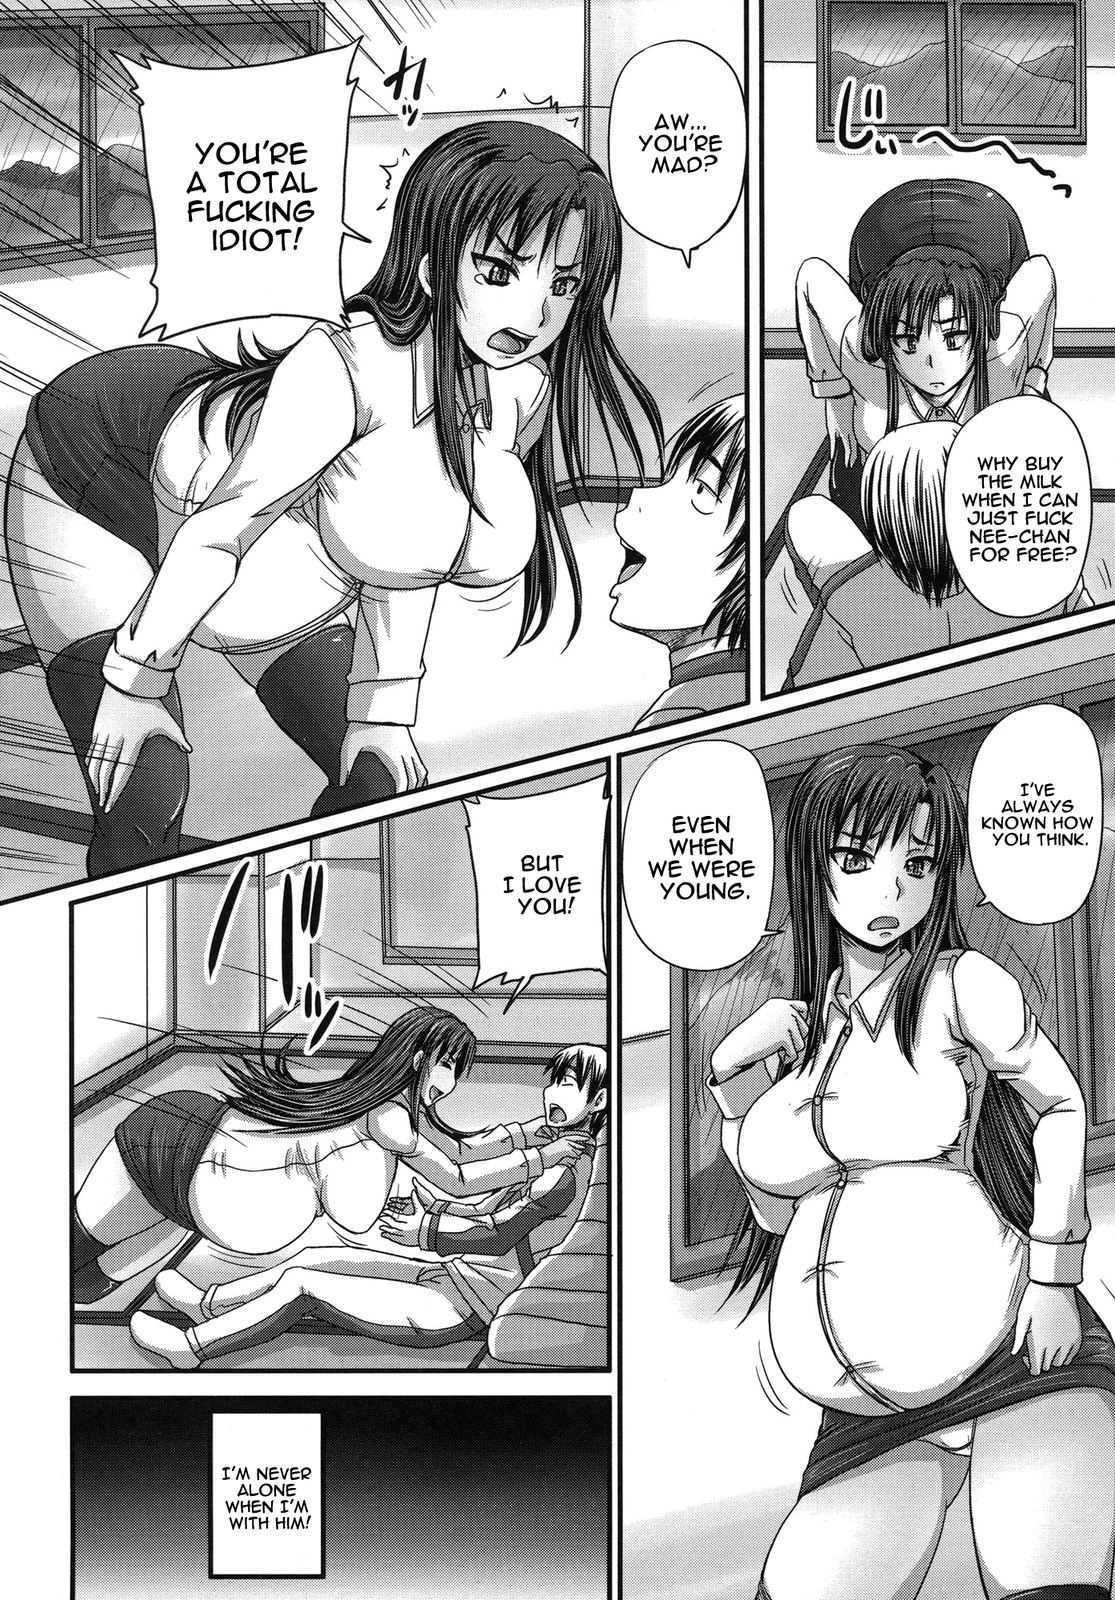 Reading Turning My Elder Sister Into A Sex Sleeve Hentai 1 Turning